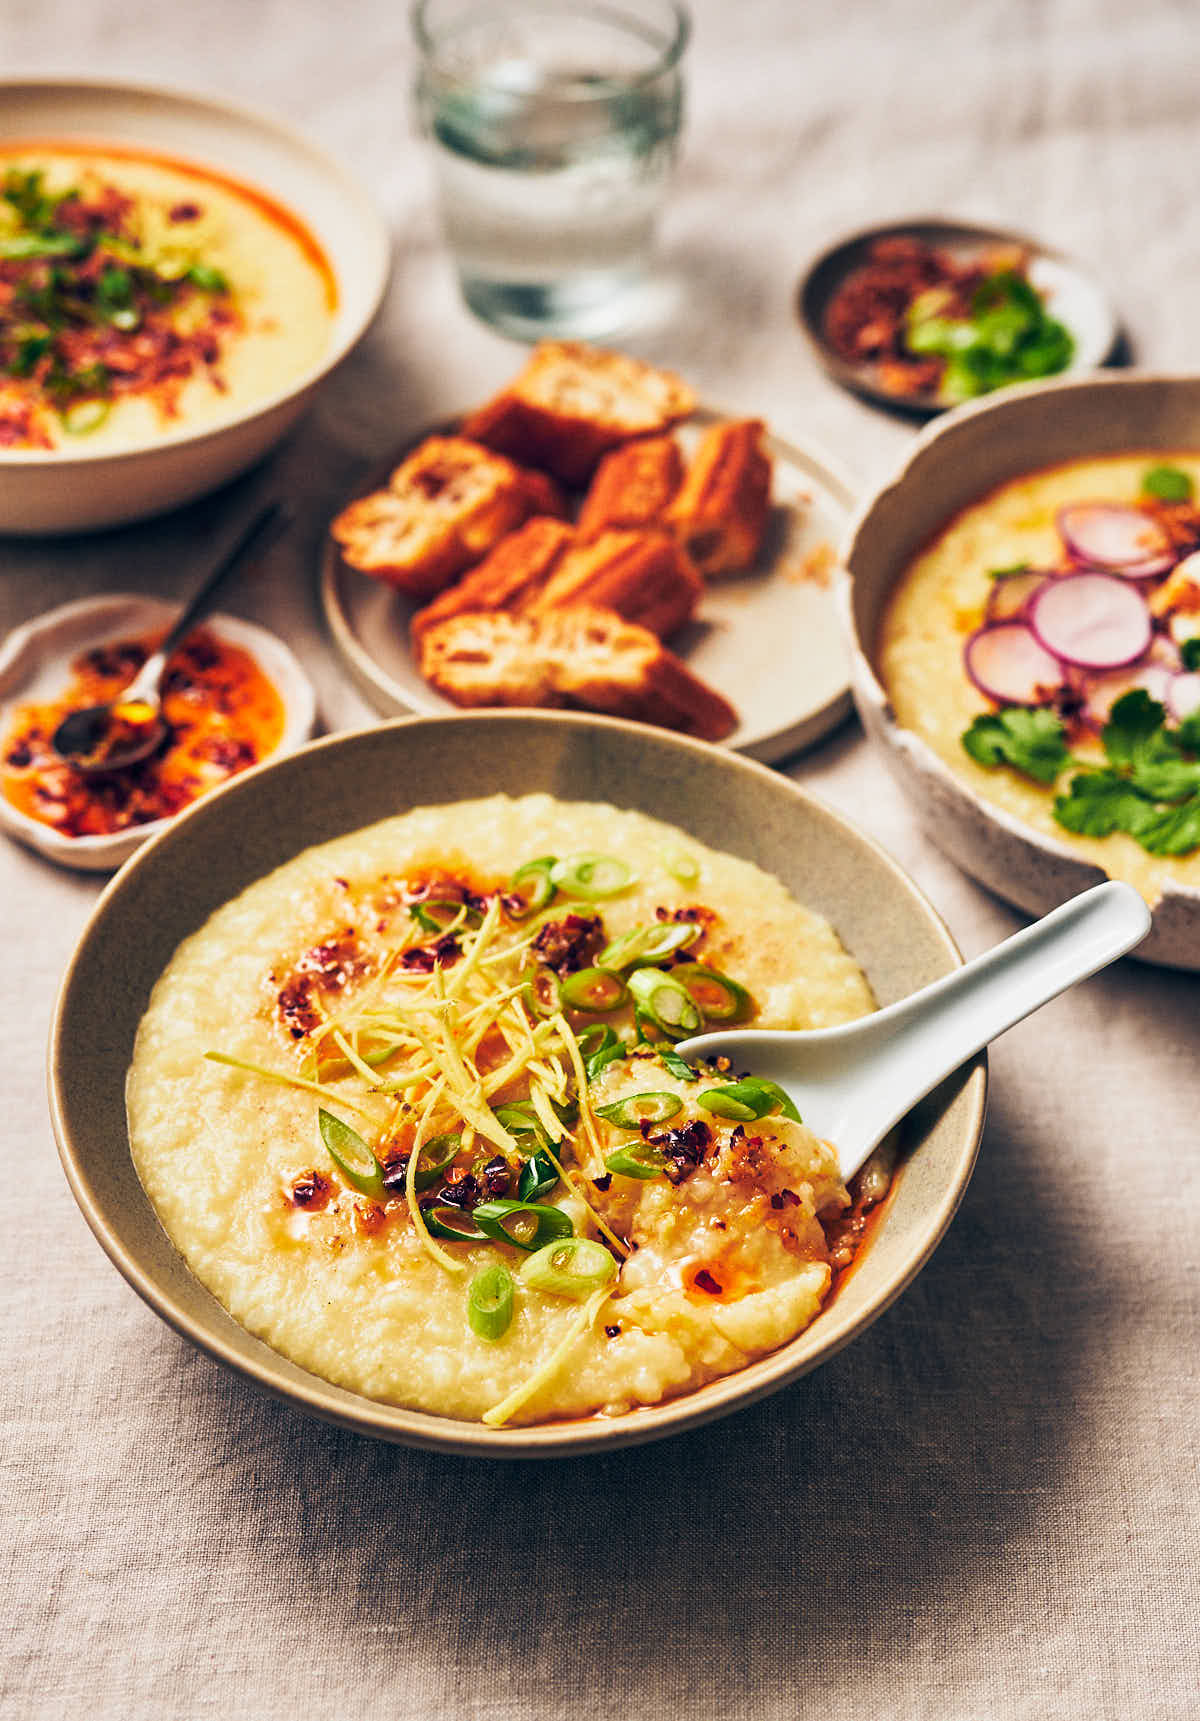 A bowl of vegan congee topped with chili garlic oil and scallions, with a white Chinese spoon scooping out some congee.